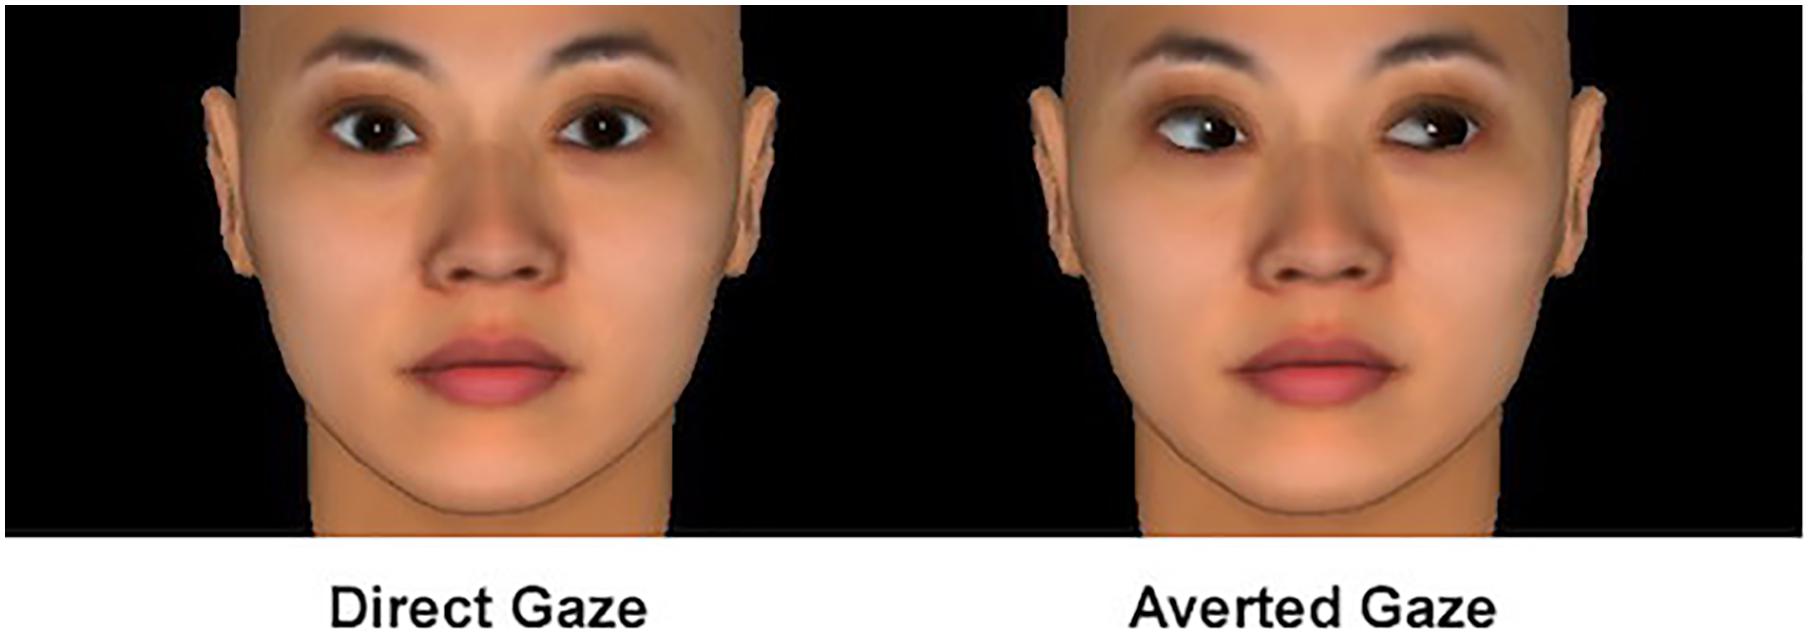 Frontiers  Implicit Perceptions of Closeness From the Direct Eye Gaze